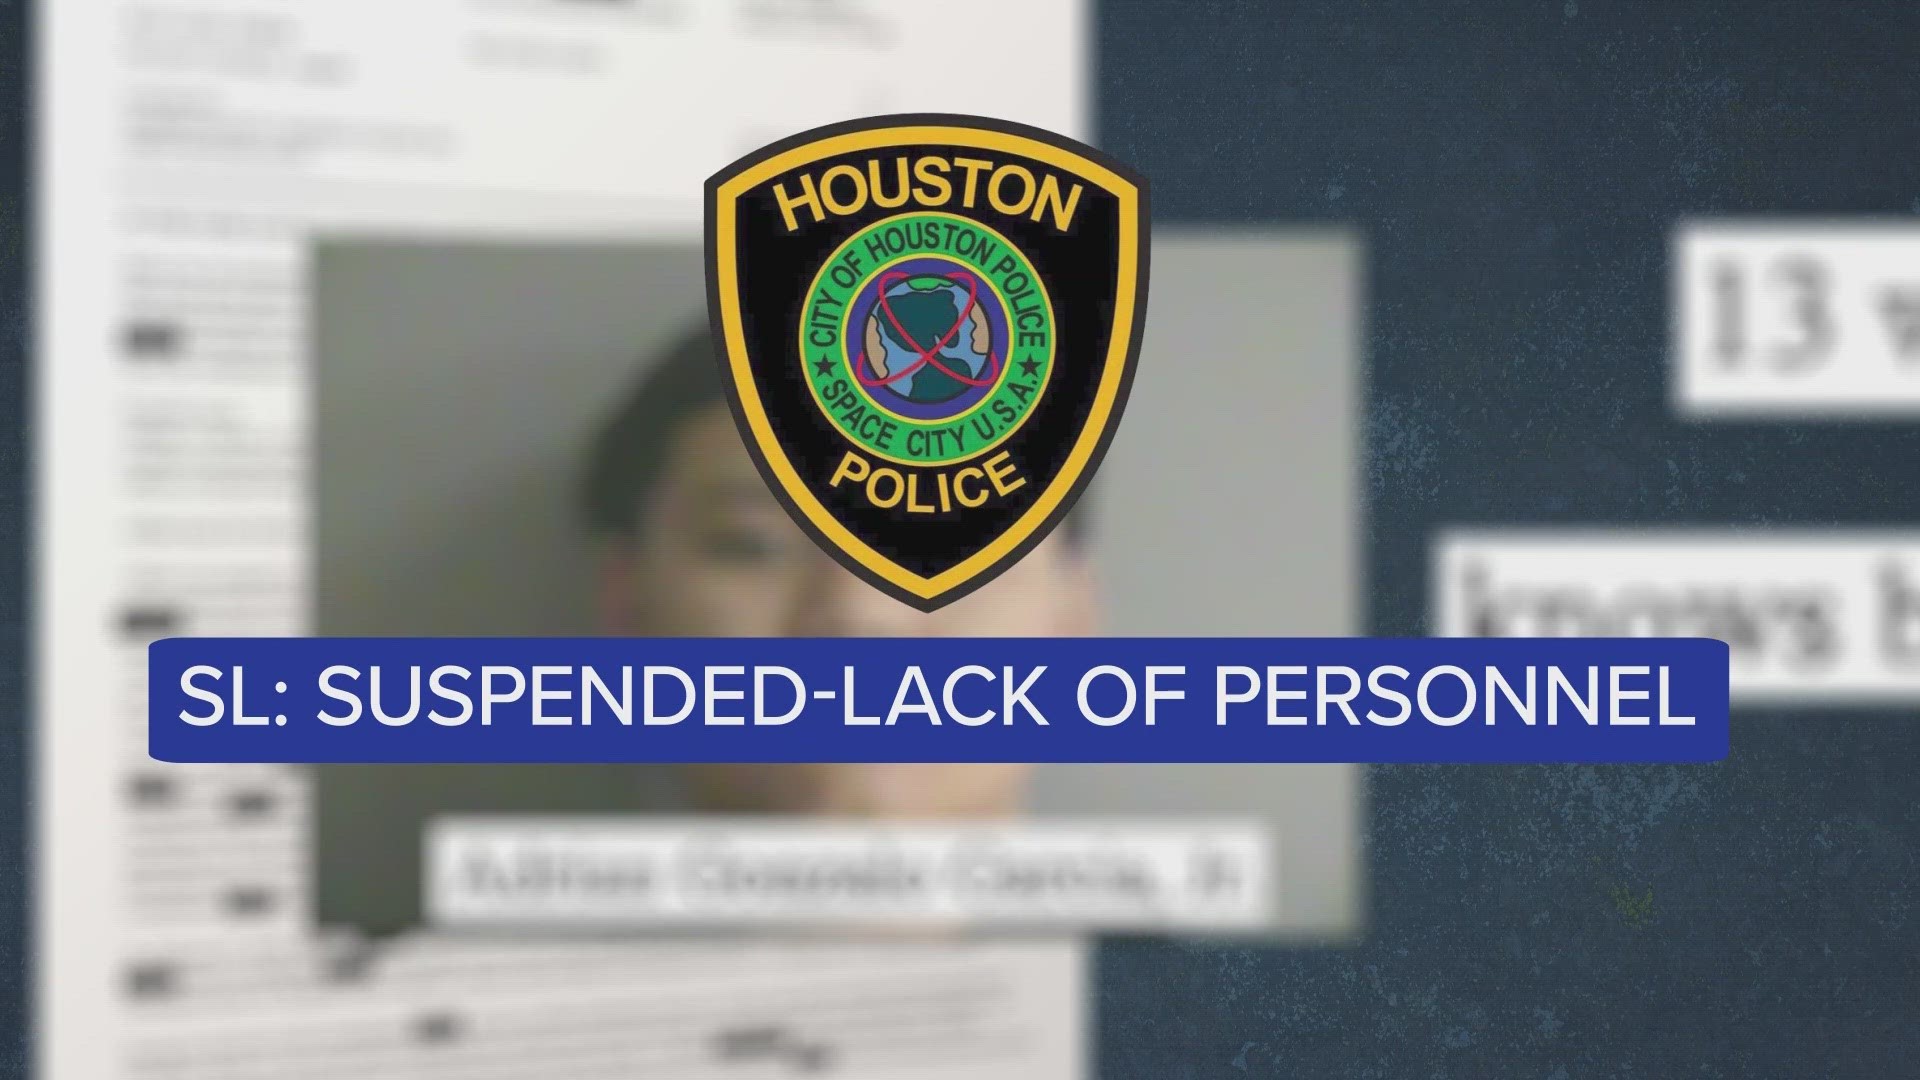 Houston Police Chief Troy Finner gave an update on Thursday, saying all of the identified adult sex crime reports that had been suspended have been reviewed.